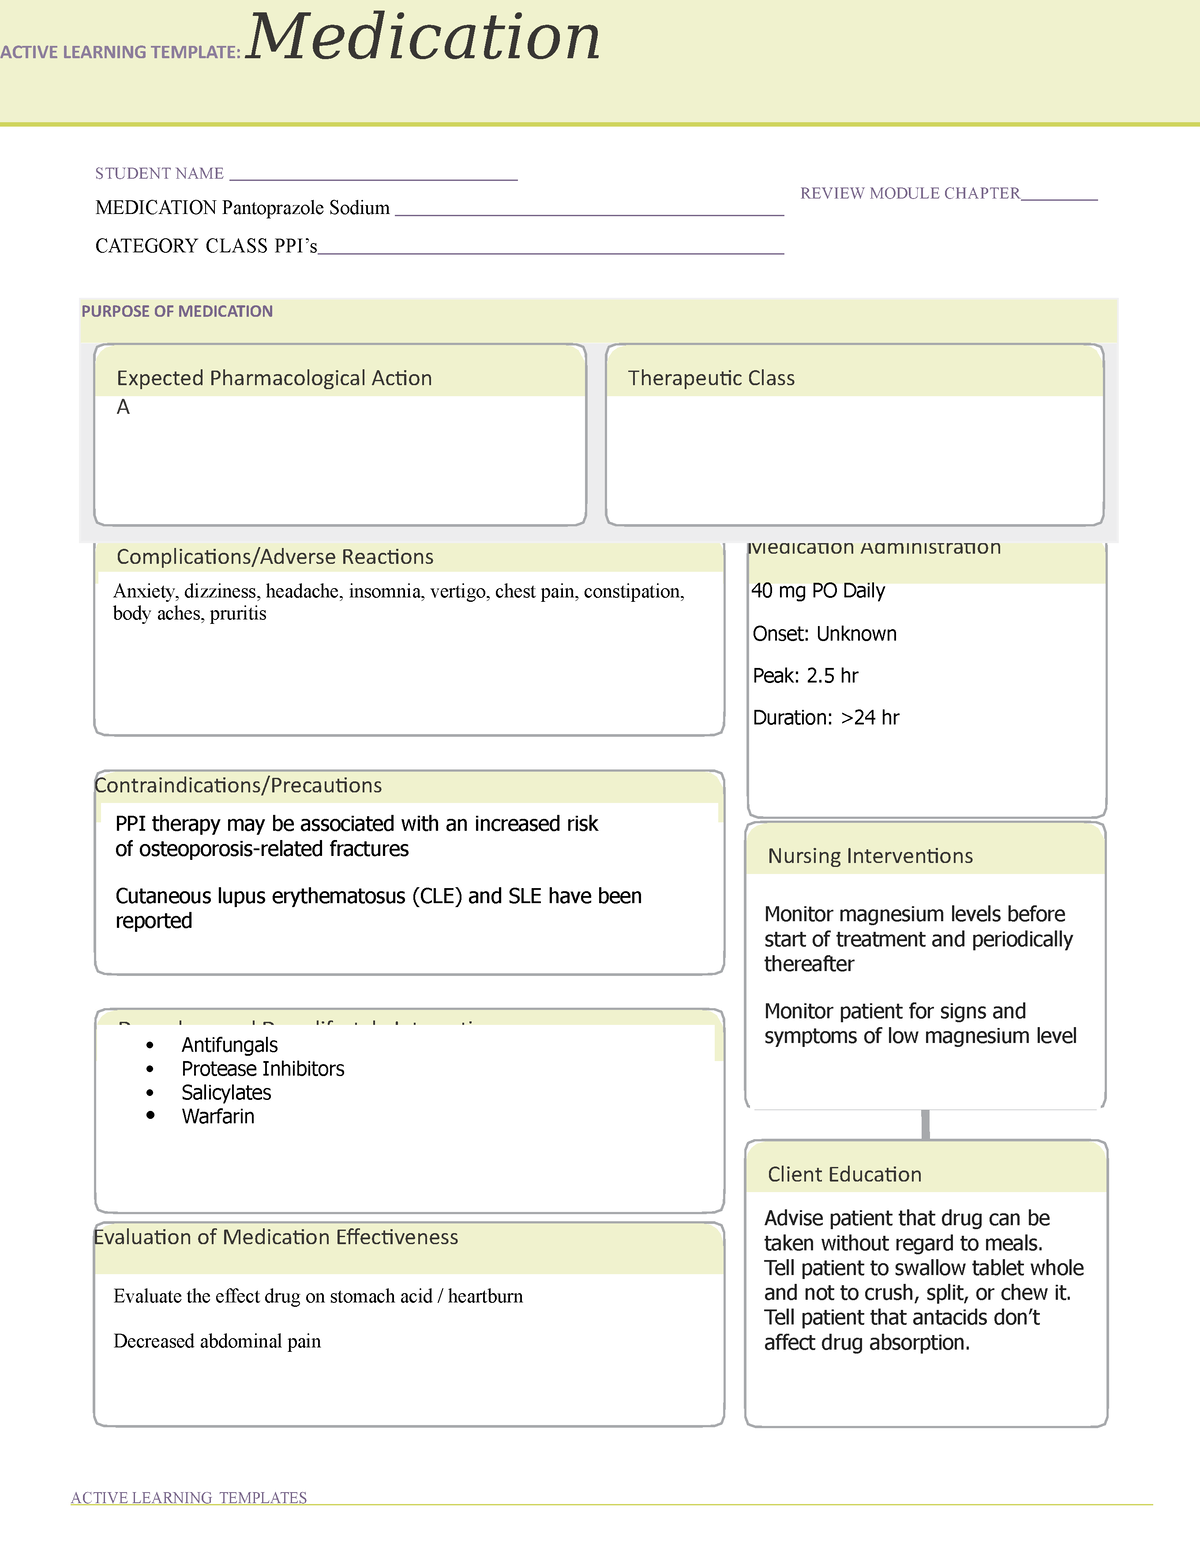 Medications Pantoprazole ati med form ACTIVE LEARNING TEMPLATE